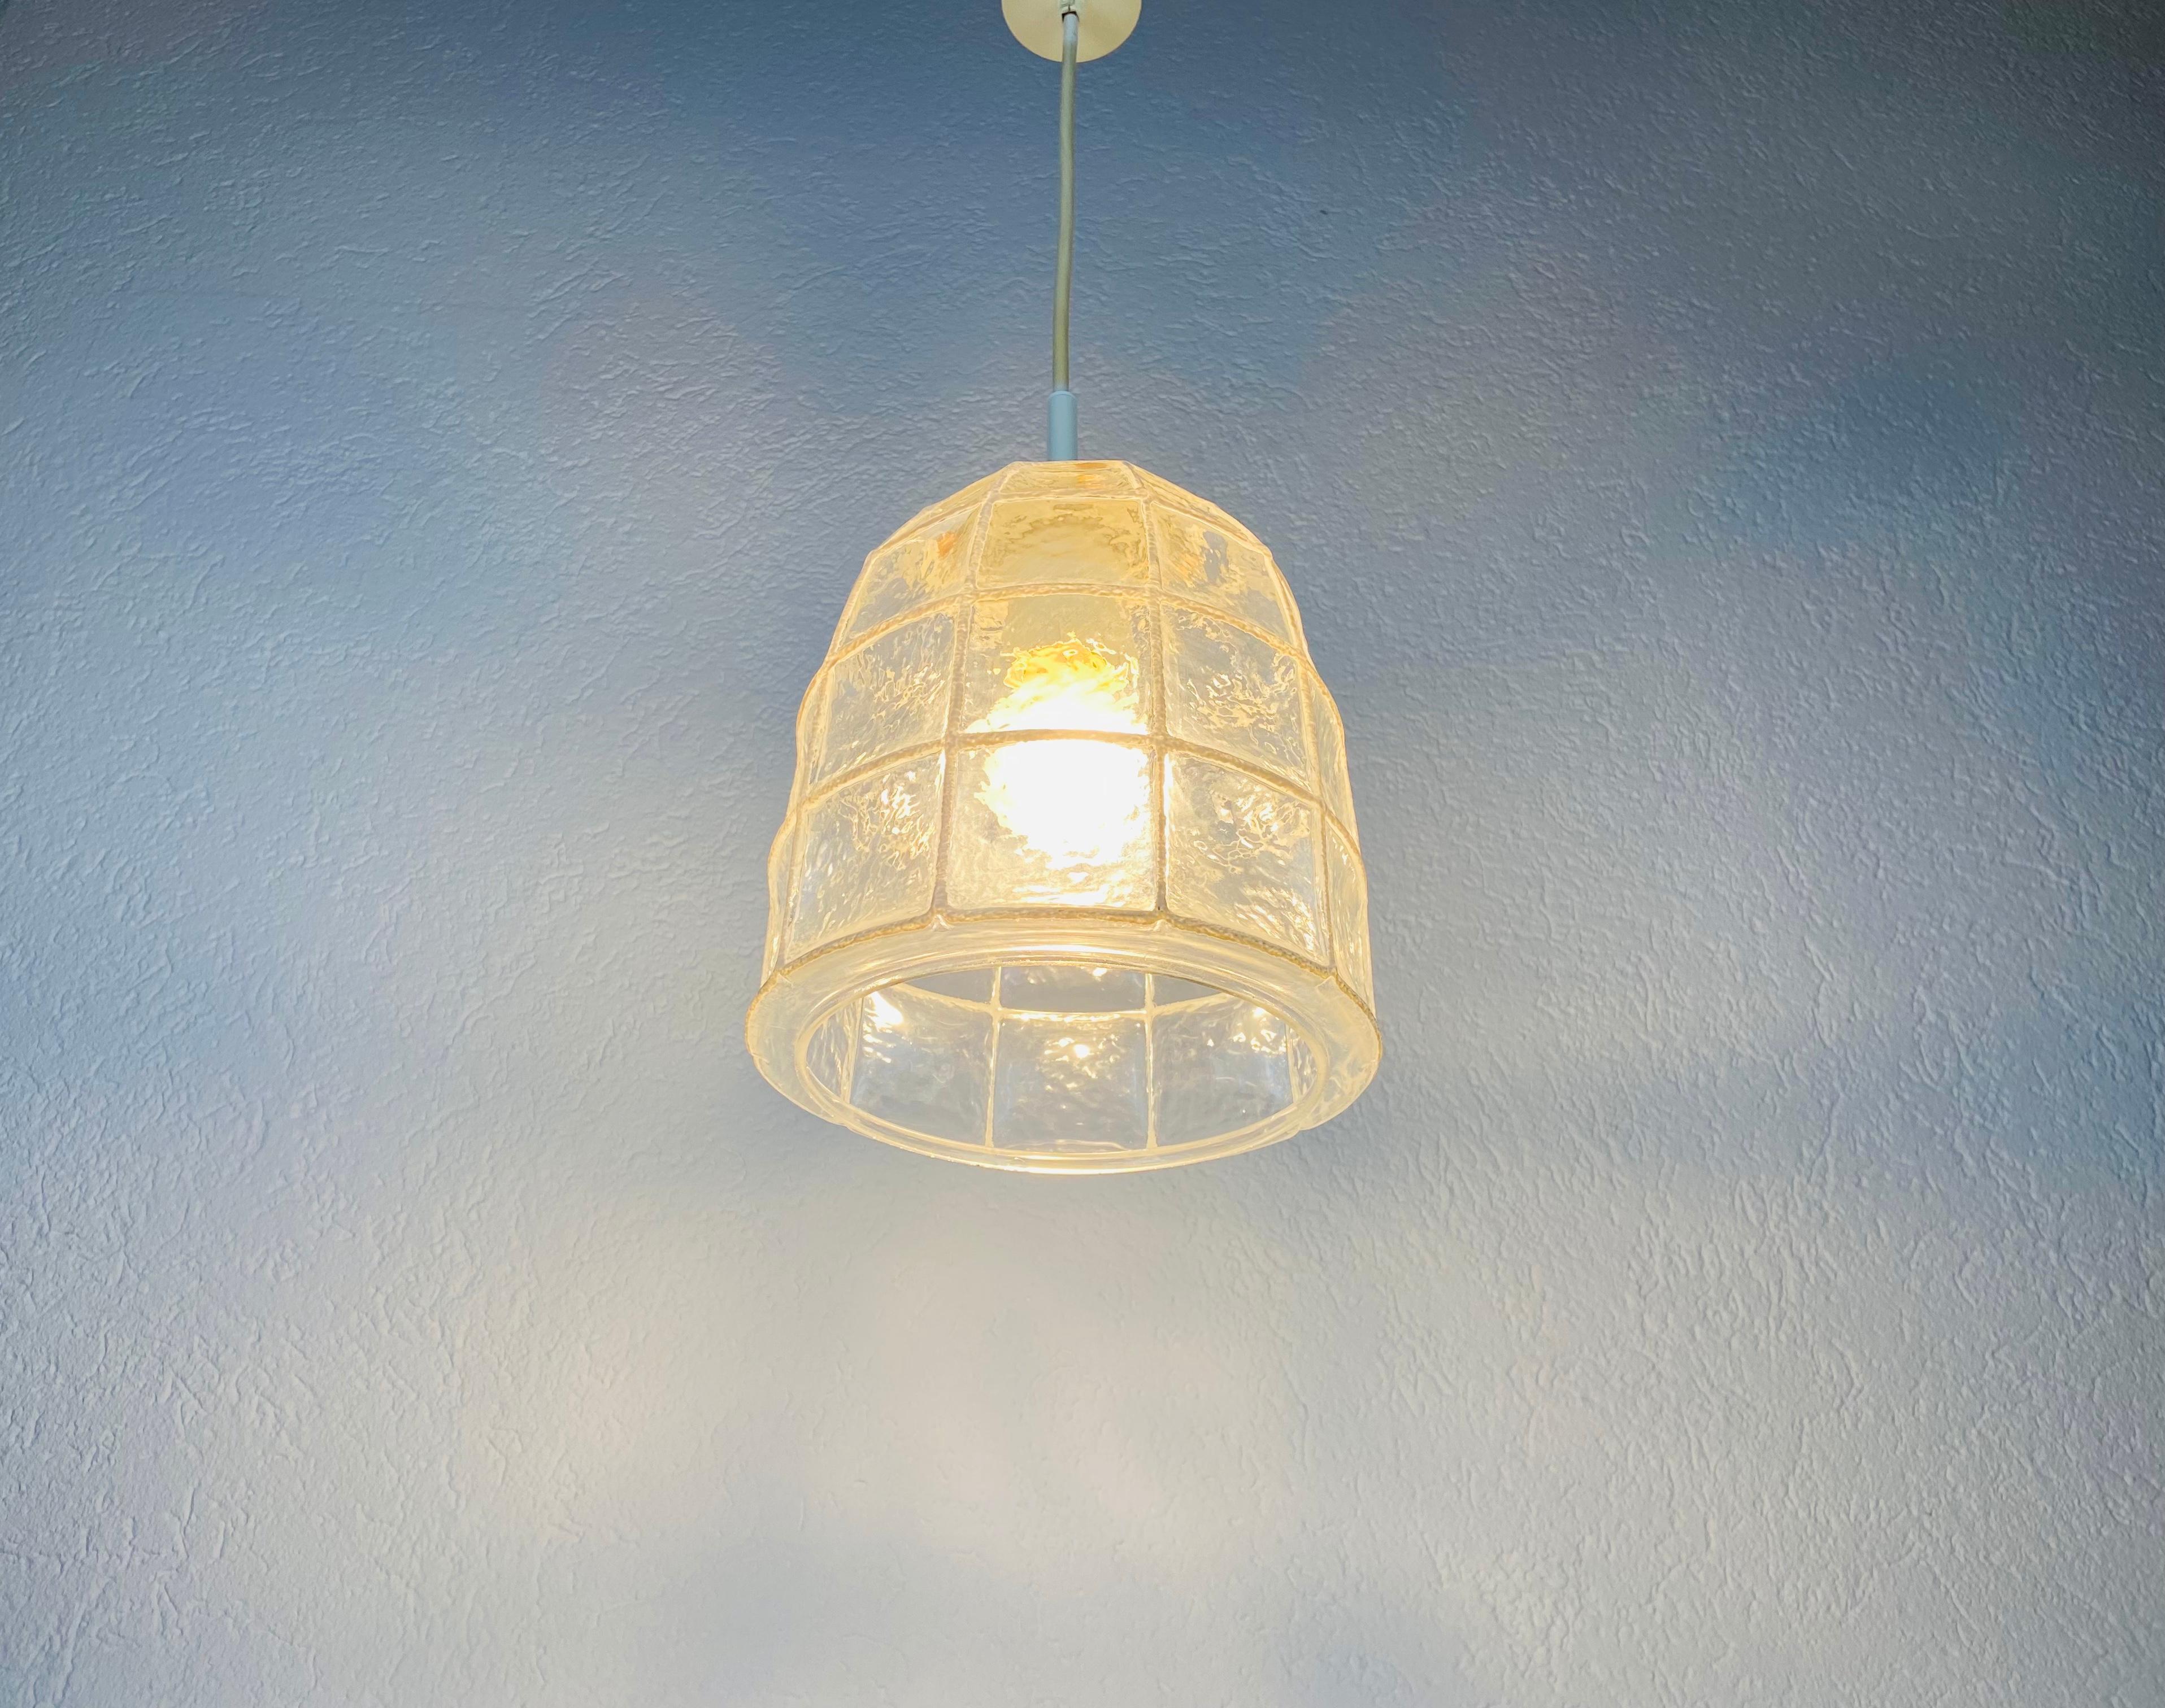 Mid-20th Century Midcentury Iron and Bubble Glass Pendant lamp by Glashütte Limburg, 1960s For Sale